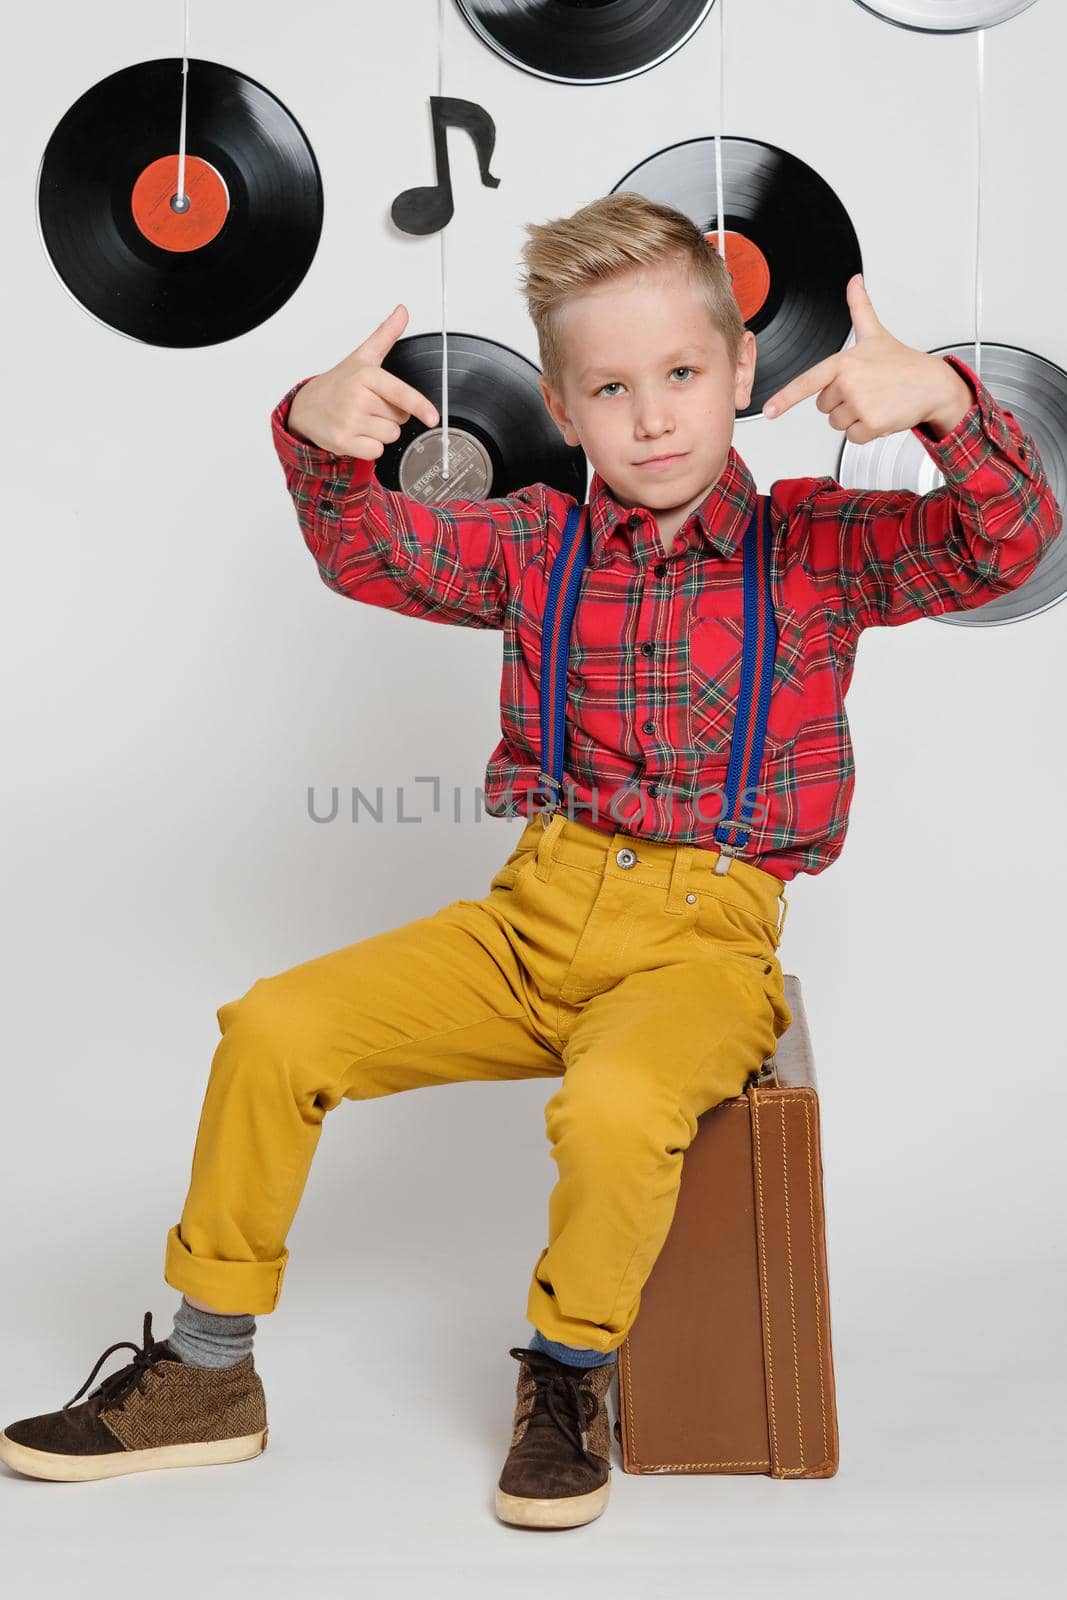 Retro disco 60s, 70s, 80s concept, funny boy wearing checked shirt and stylish haircut sitting on a suitcase, background with music plate by natus111